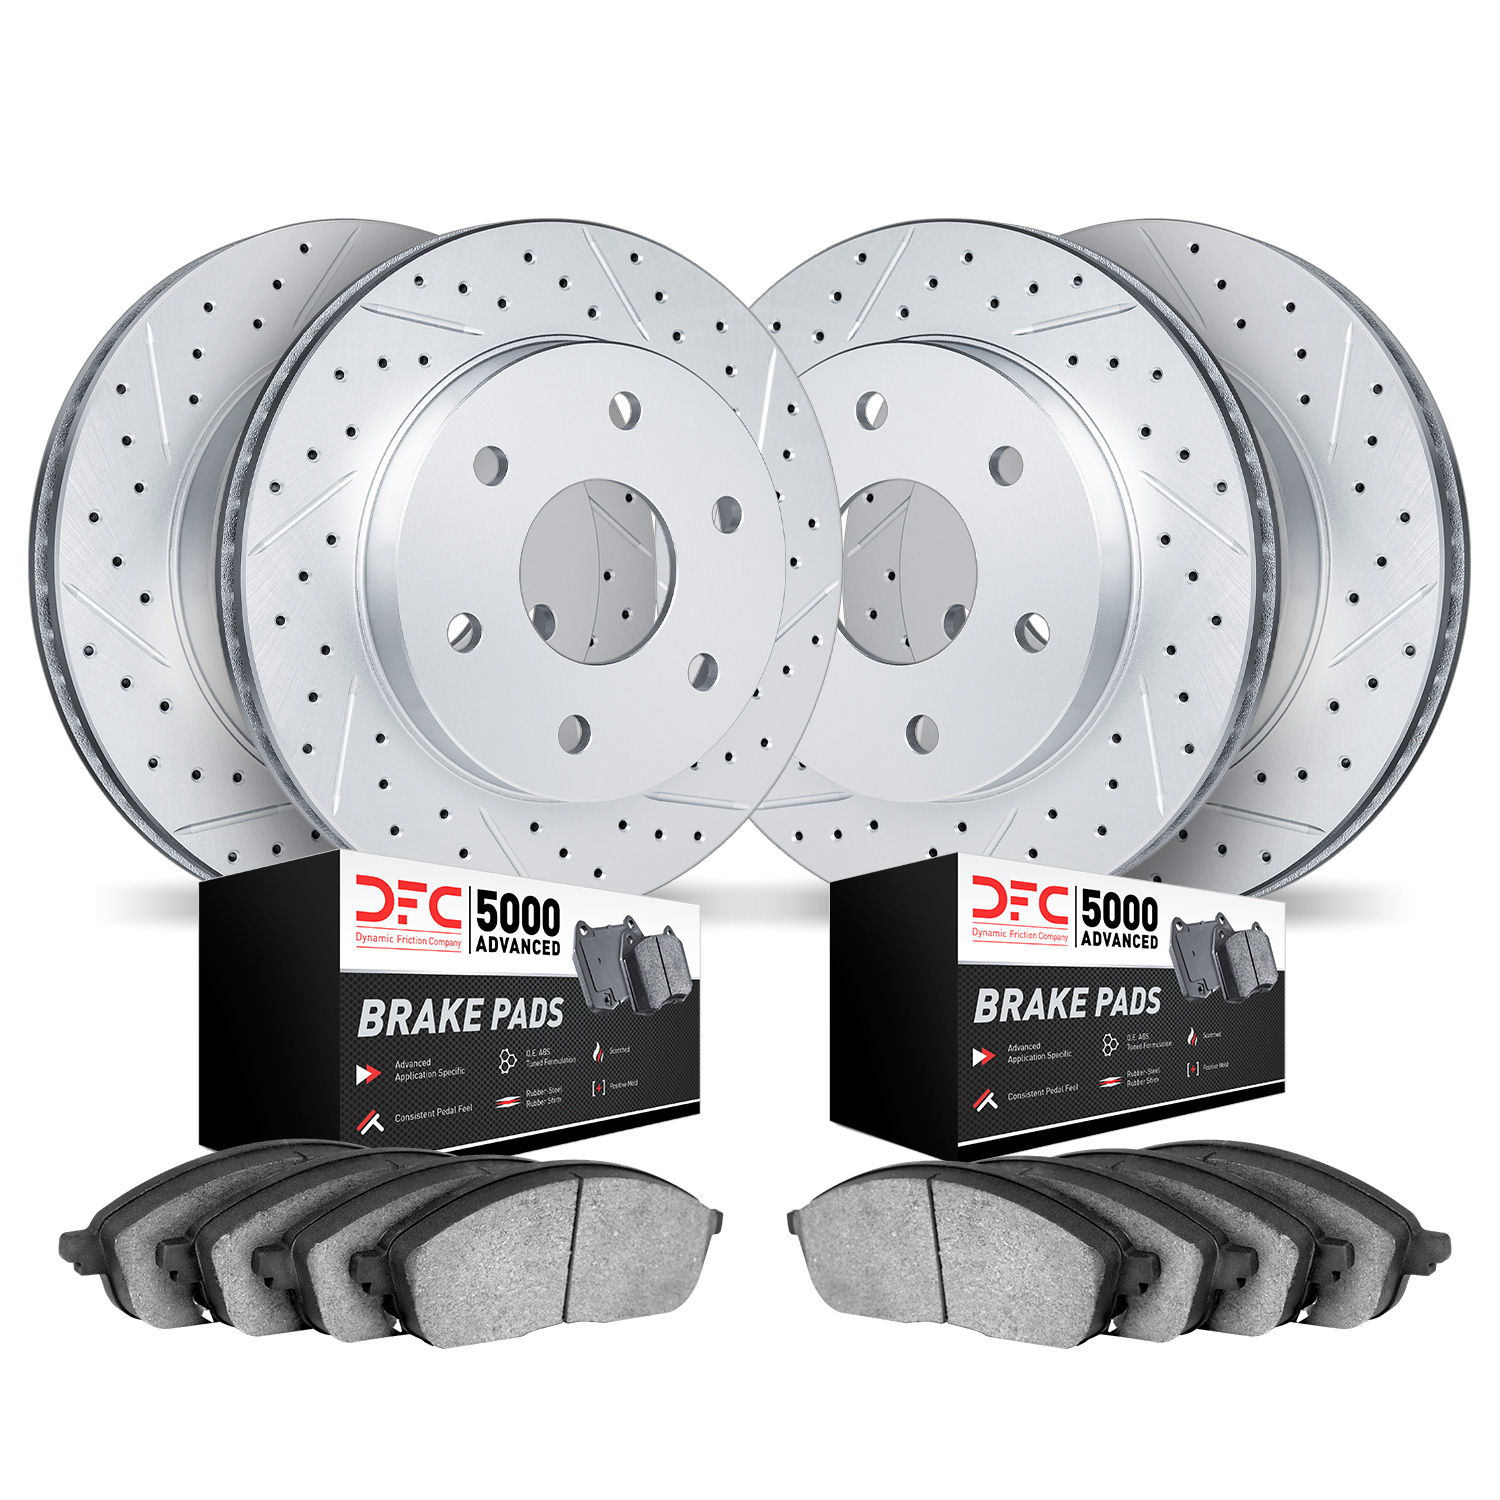 2504-37002 Geoperformance Drilled/Slotted Rotors w/5000 Advanced Brake Pads Kit, 1992-2002 Multiple Makes/Models, Position: Fron